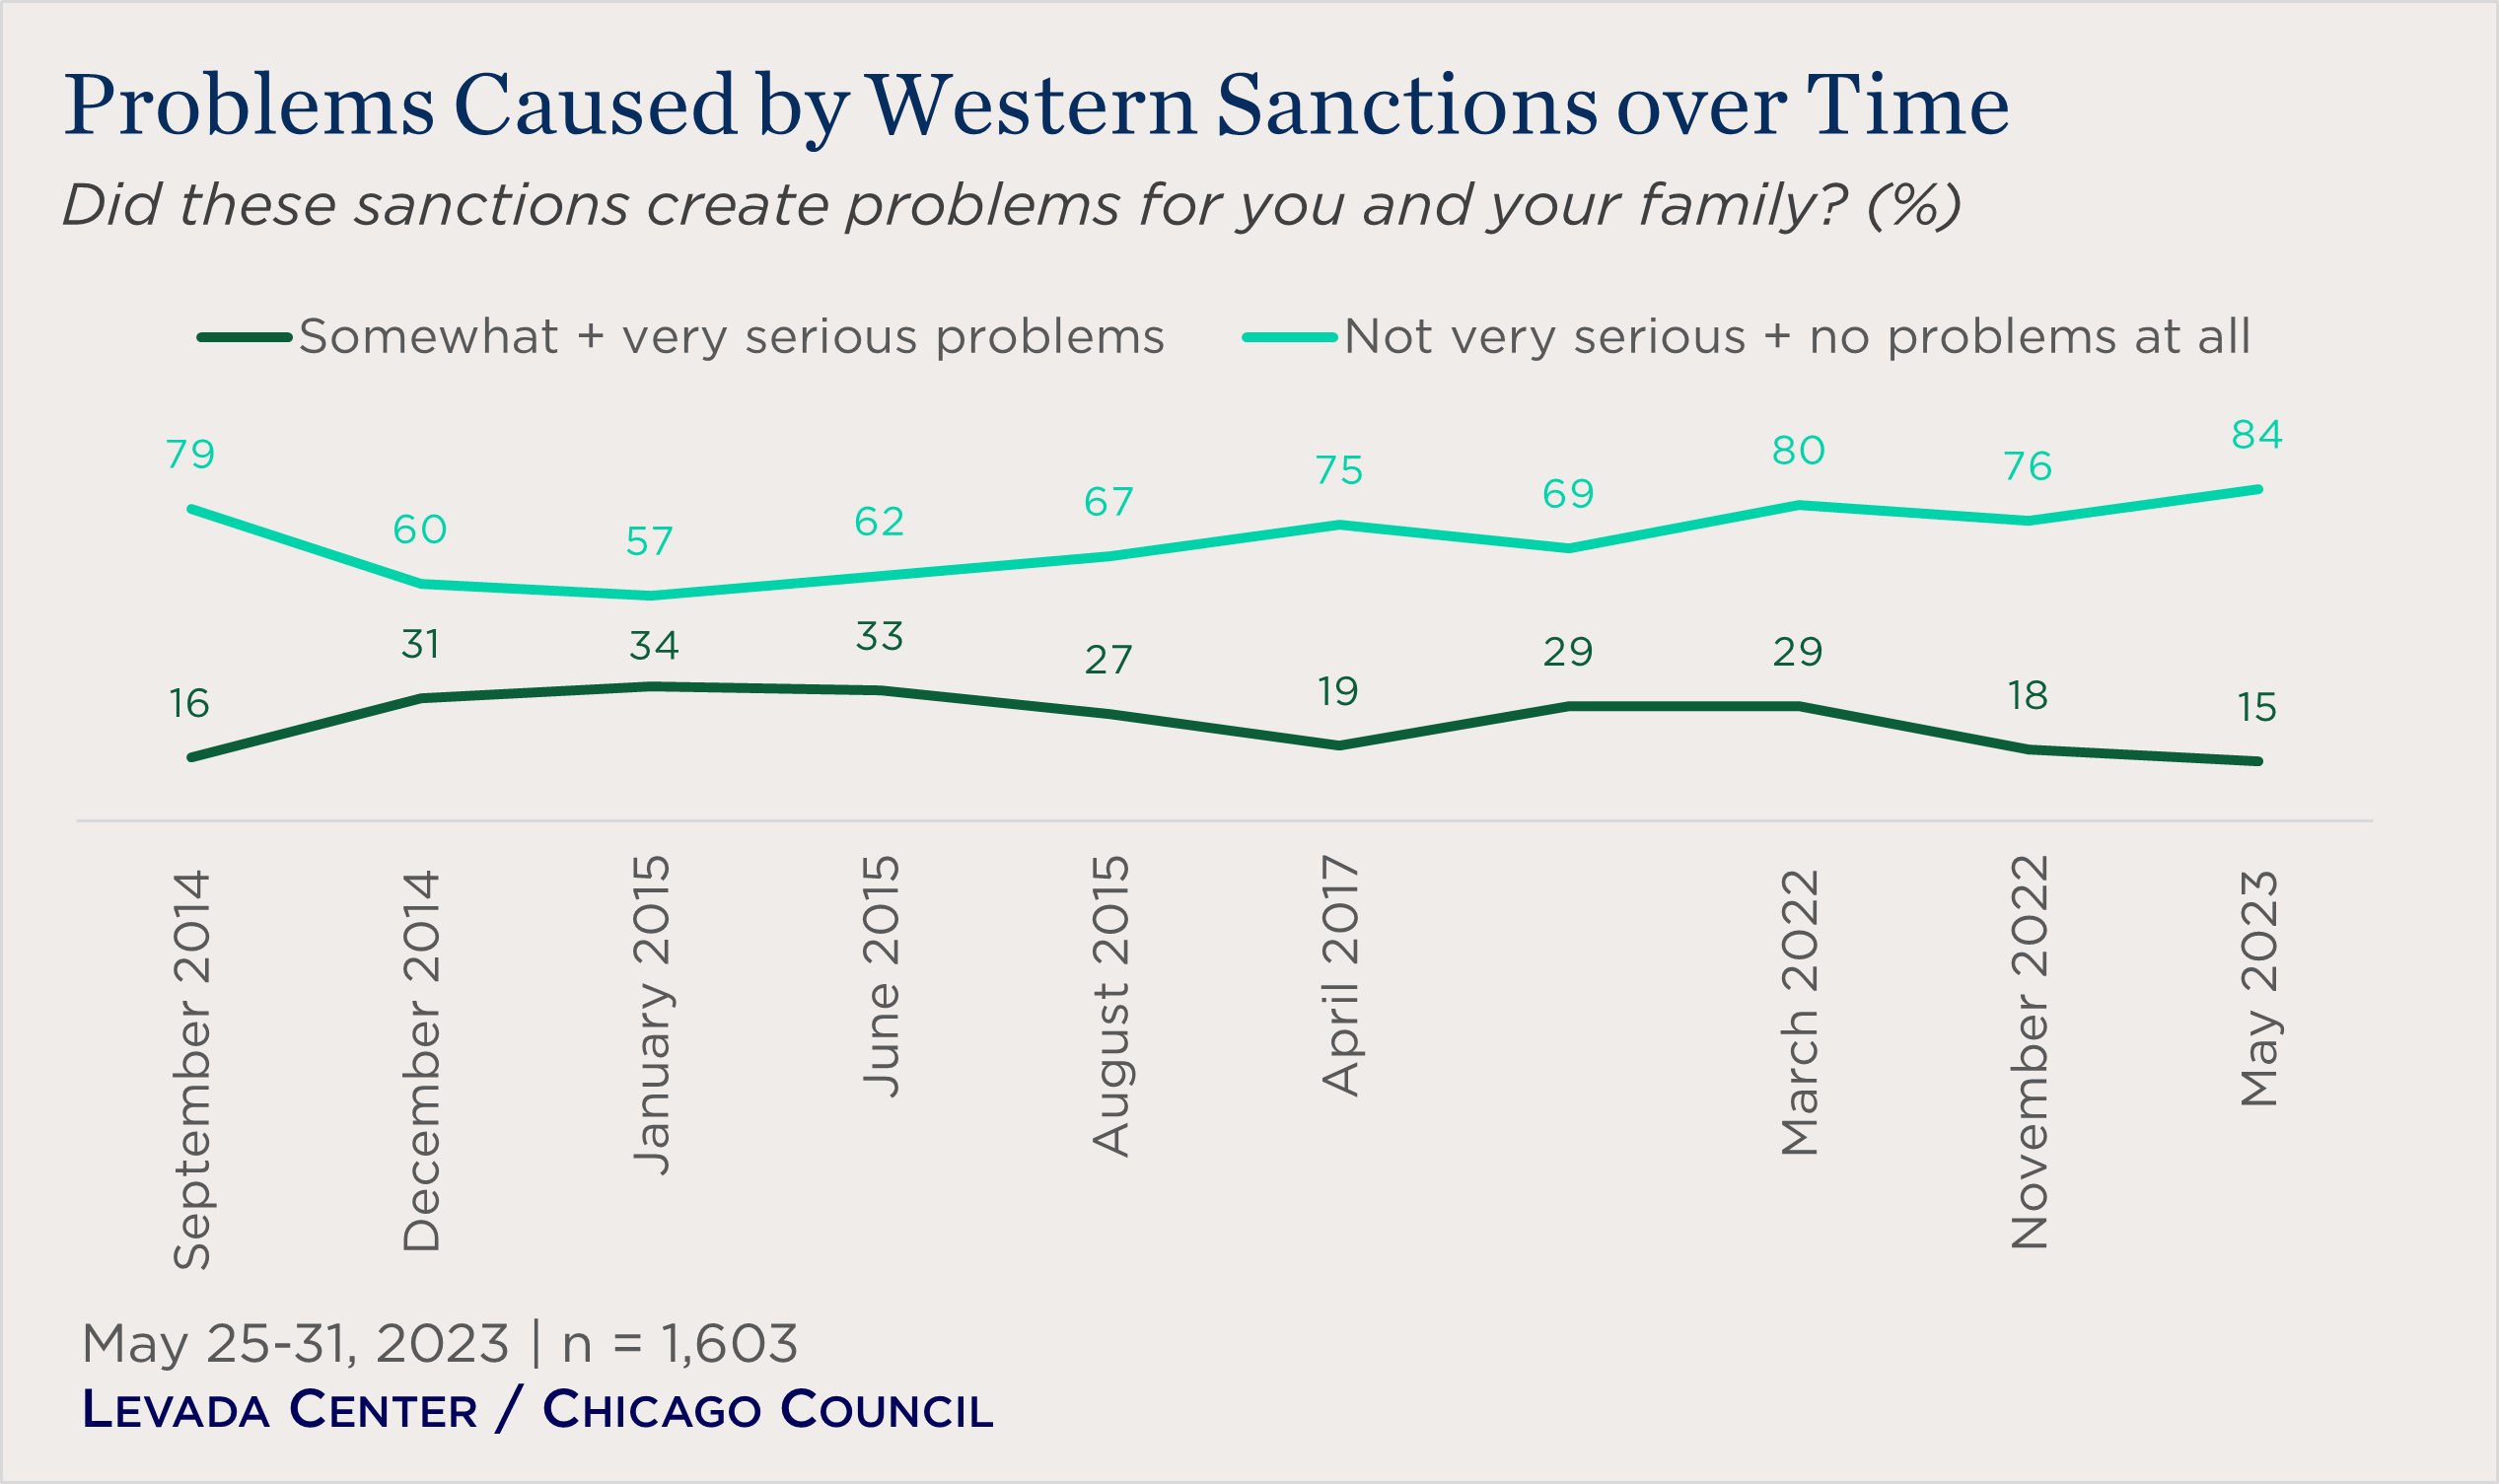 "line chart showing problems caused by sanctions over time"